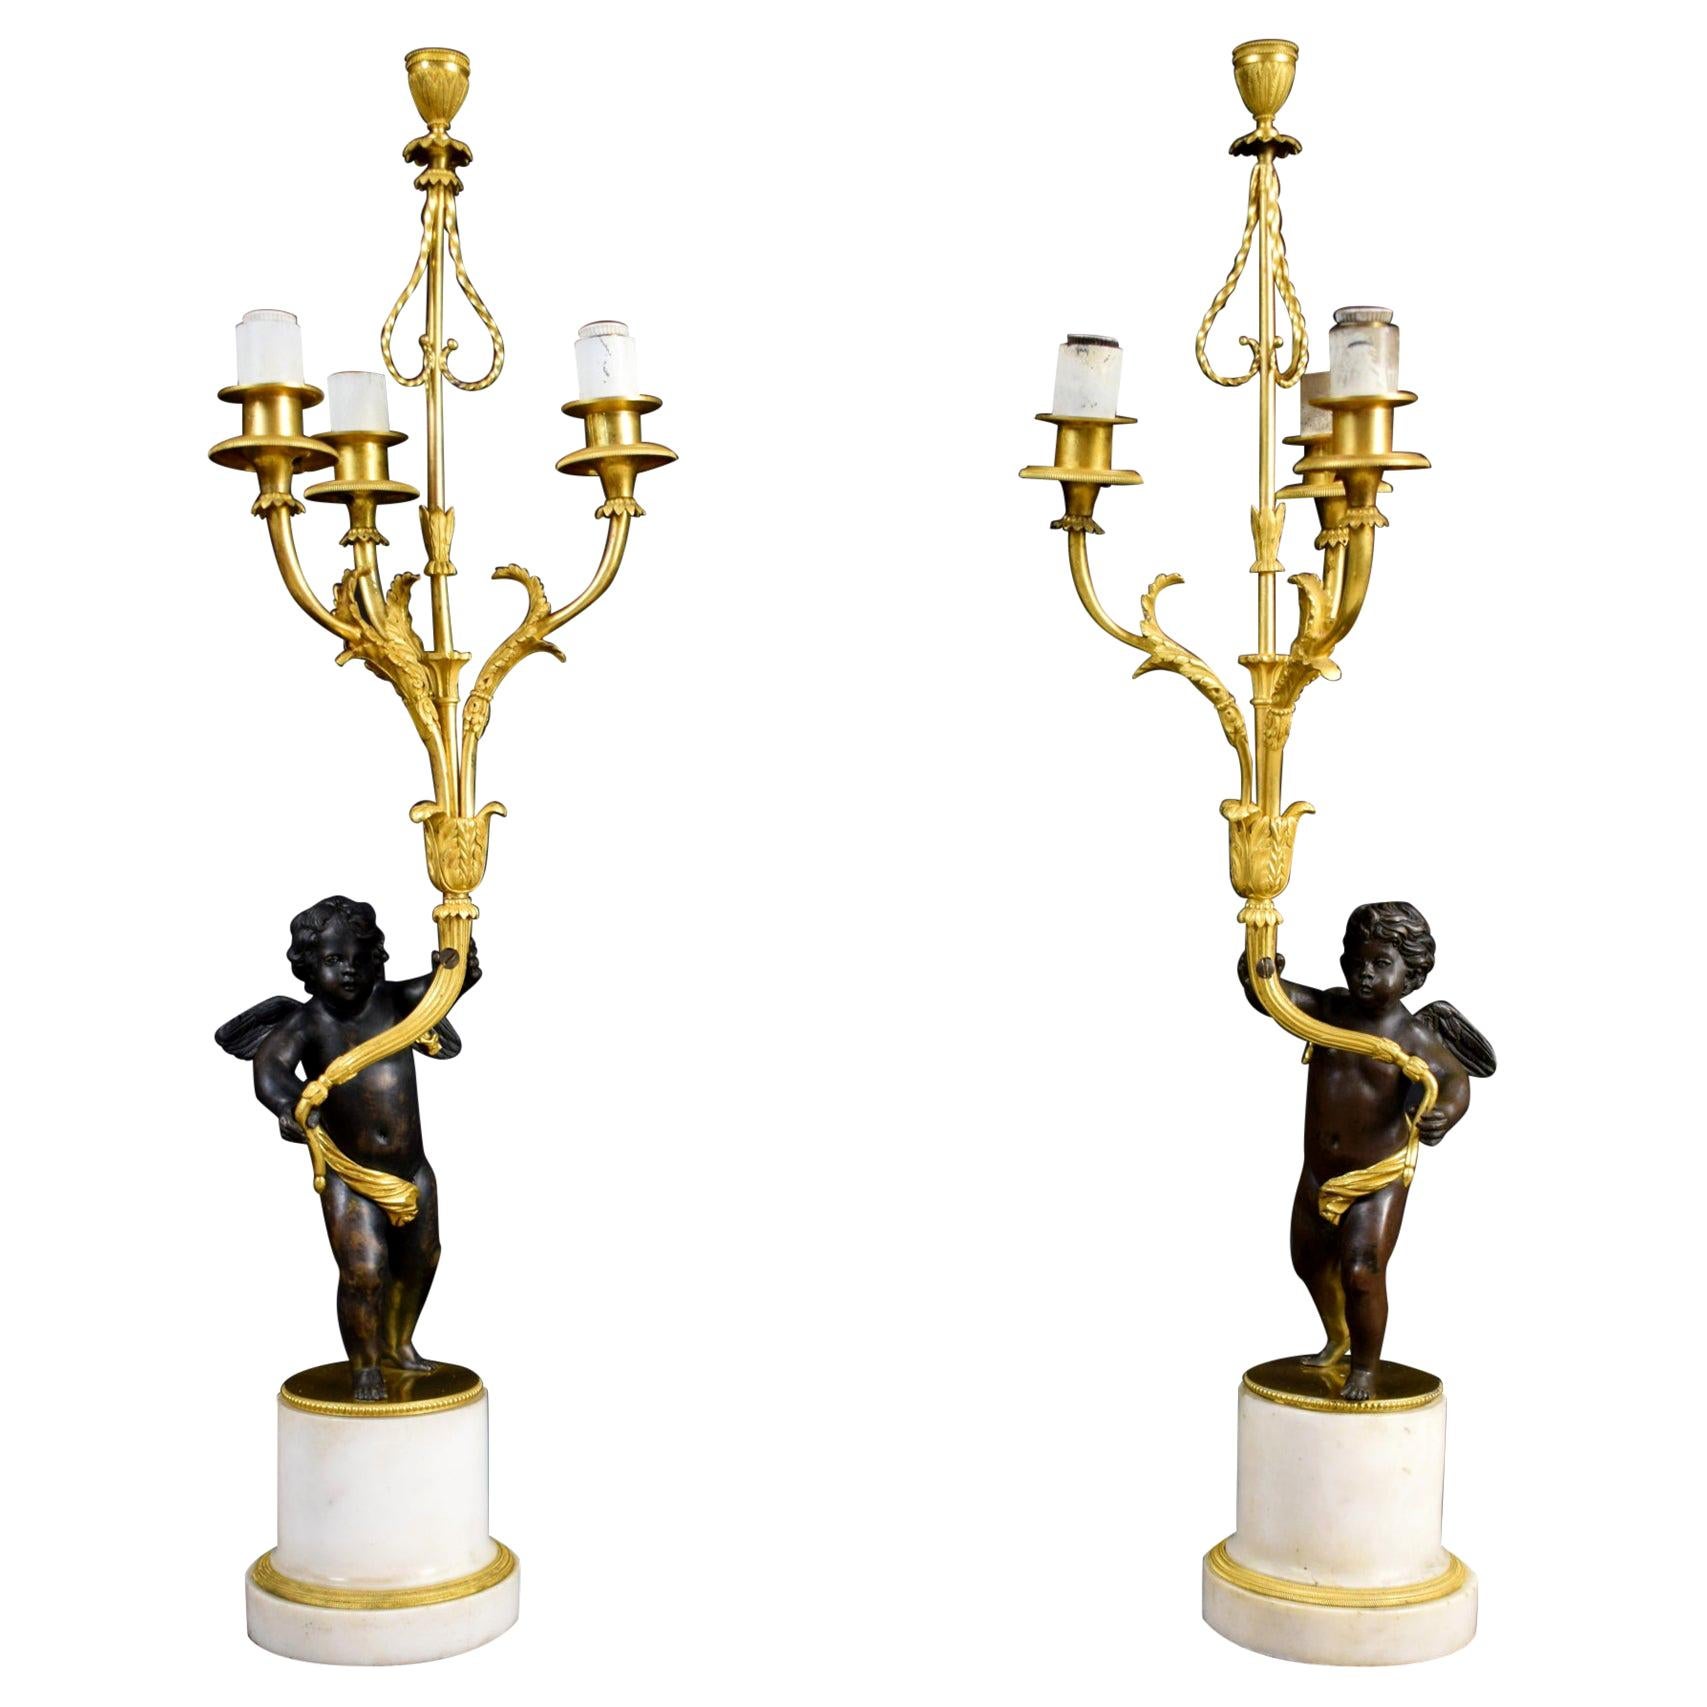 18th Century, Pair of French Gilded Bronze Candlesticks